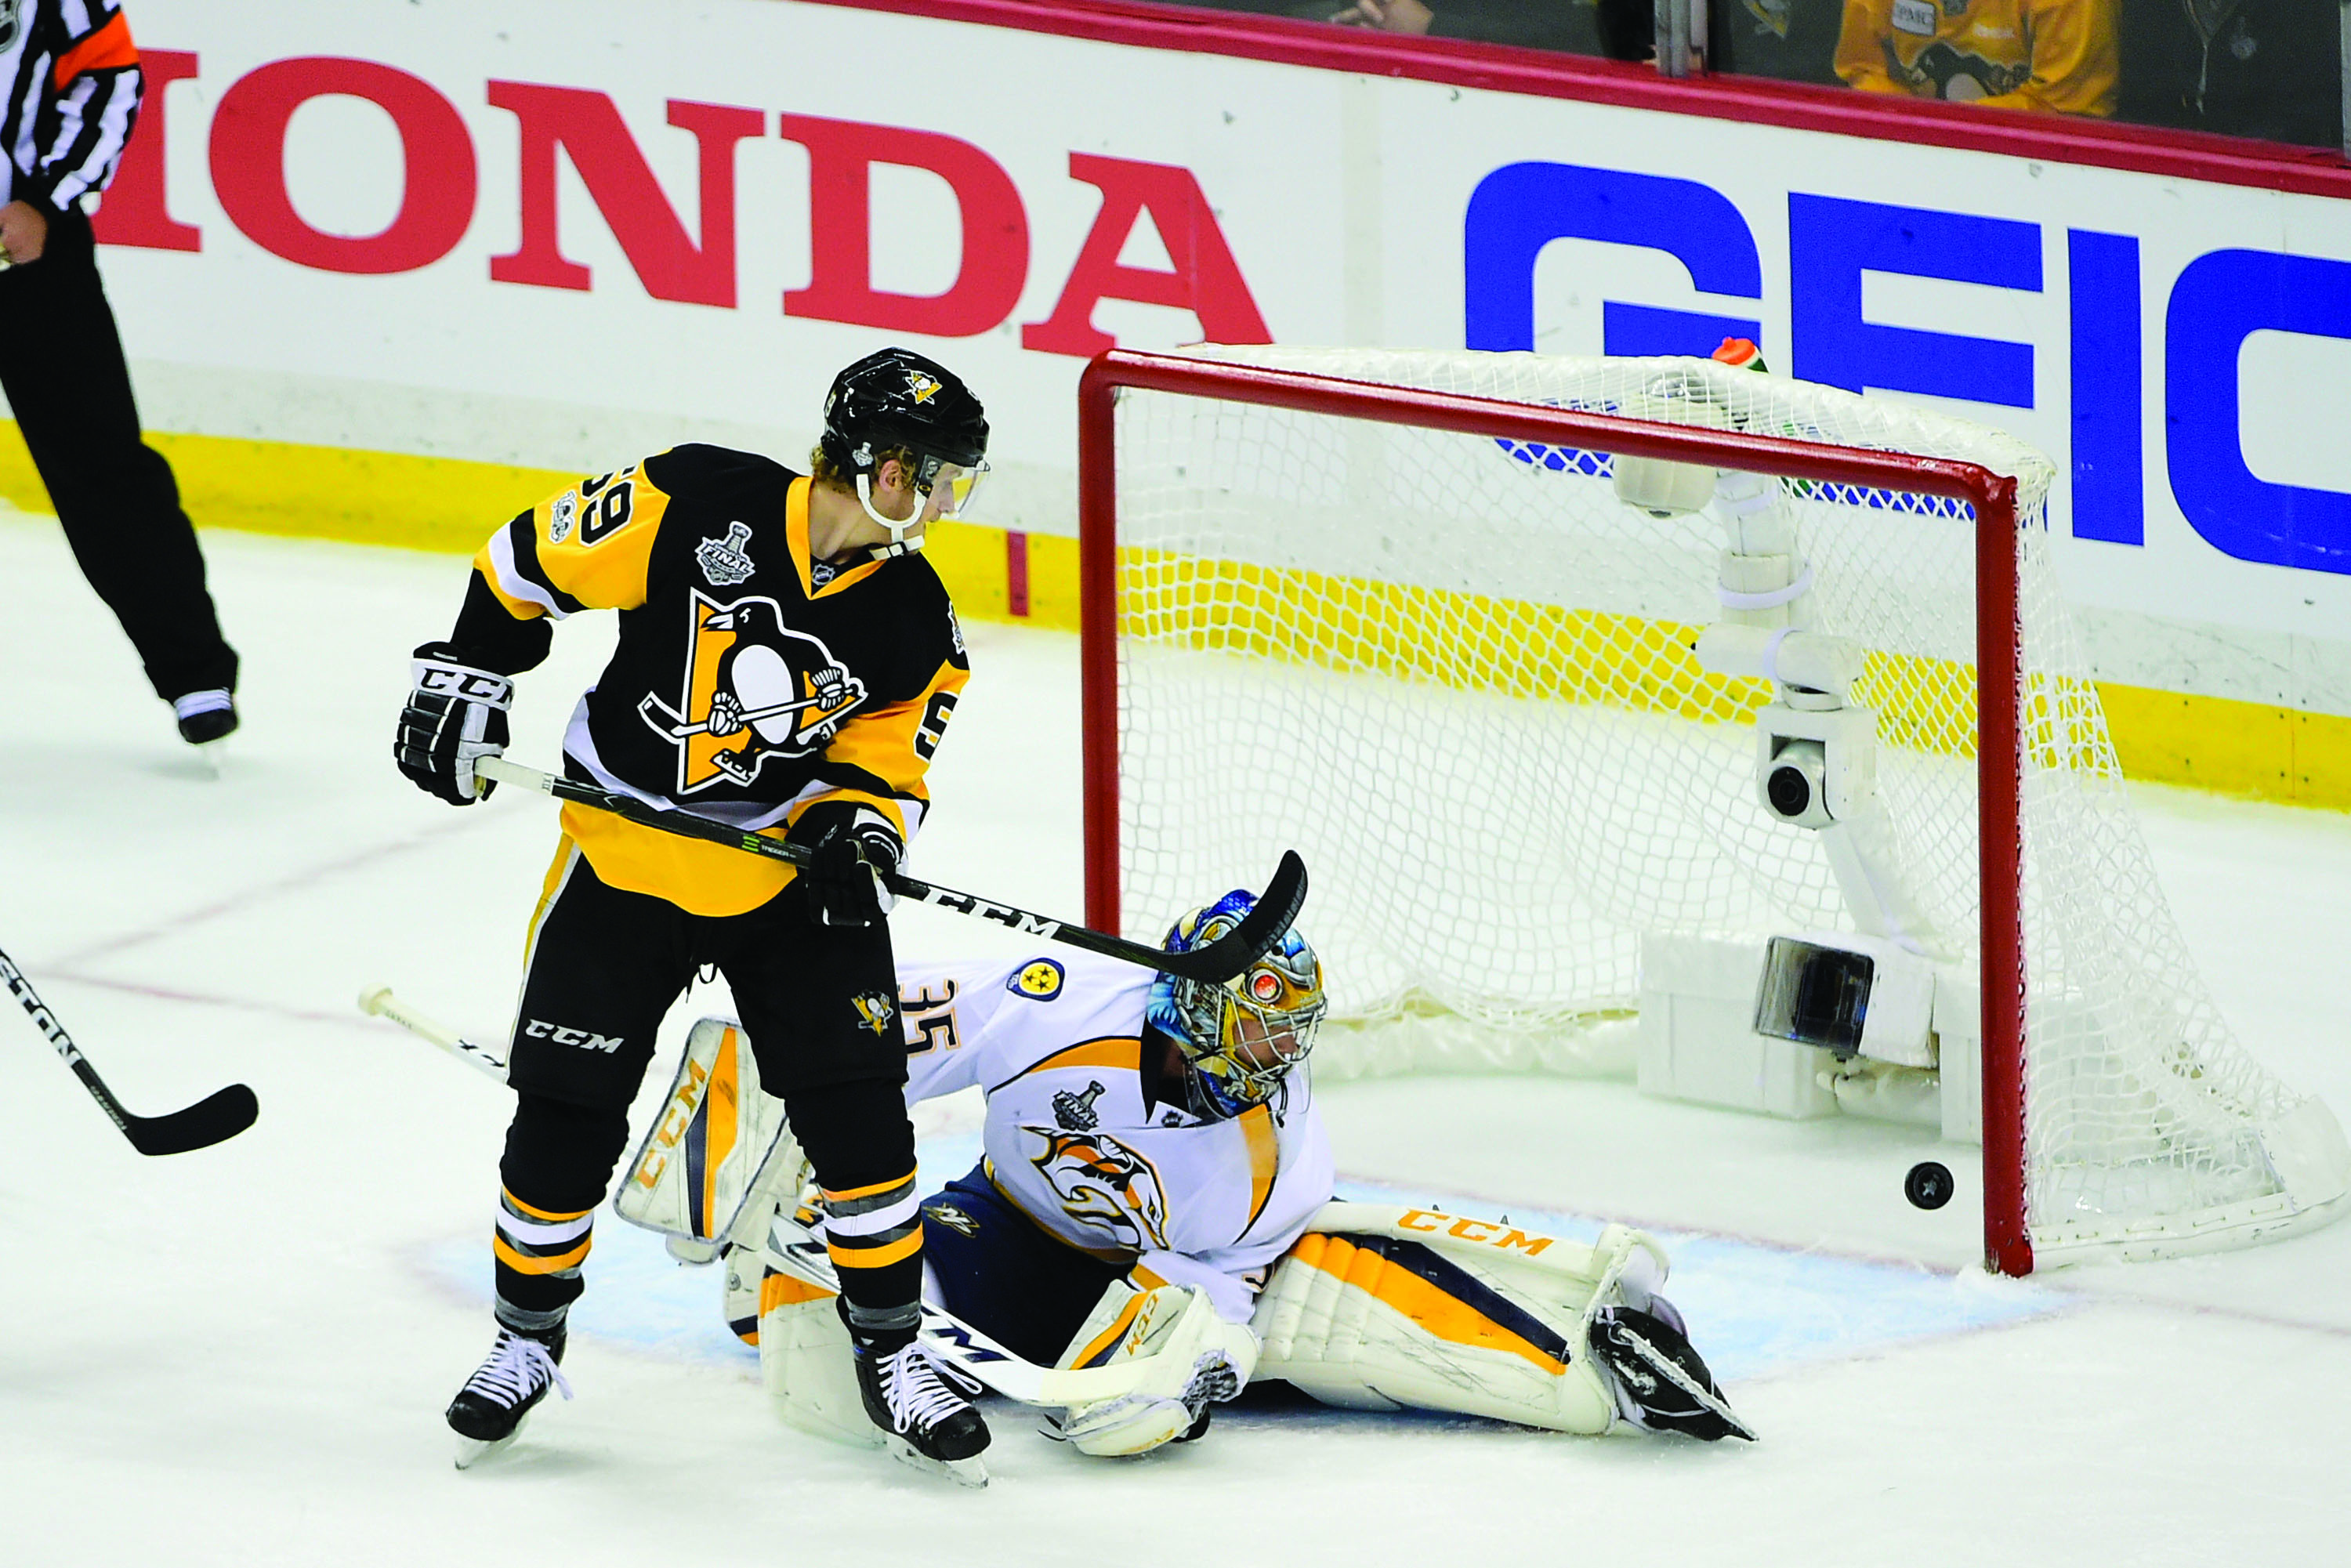 Nashville Predators goalie Pekka Rinne (35) and Pittsburgh Penguins center Jake Guentzel (59) watch the puck cross the goal line during game one of the National Hockey League Stanley Cup Finals on Monday, May 29, 2017 at PPG Paints Arena in Pittsburgh, Pa. (Eric Canha/Cal Sport Media/Zuma Press/TNS)